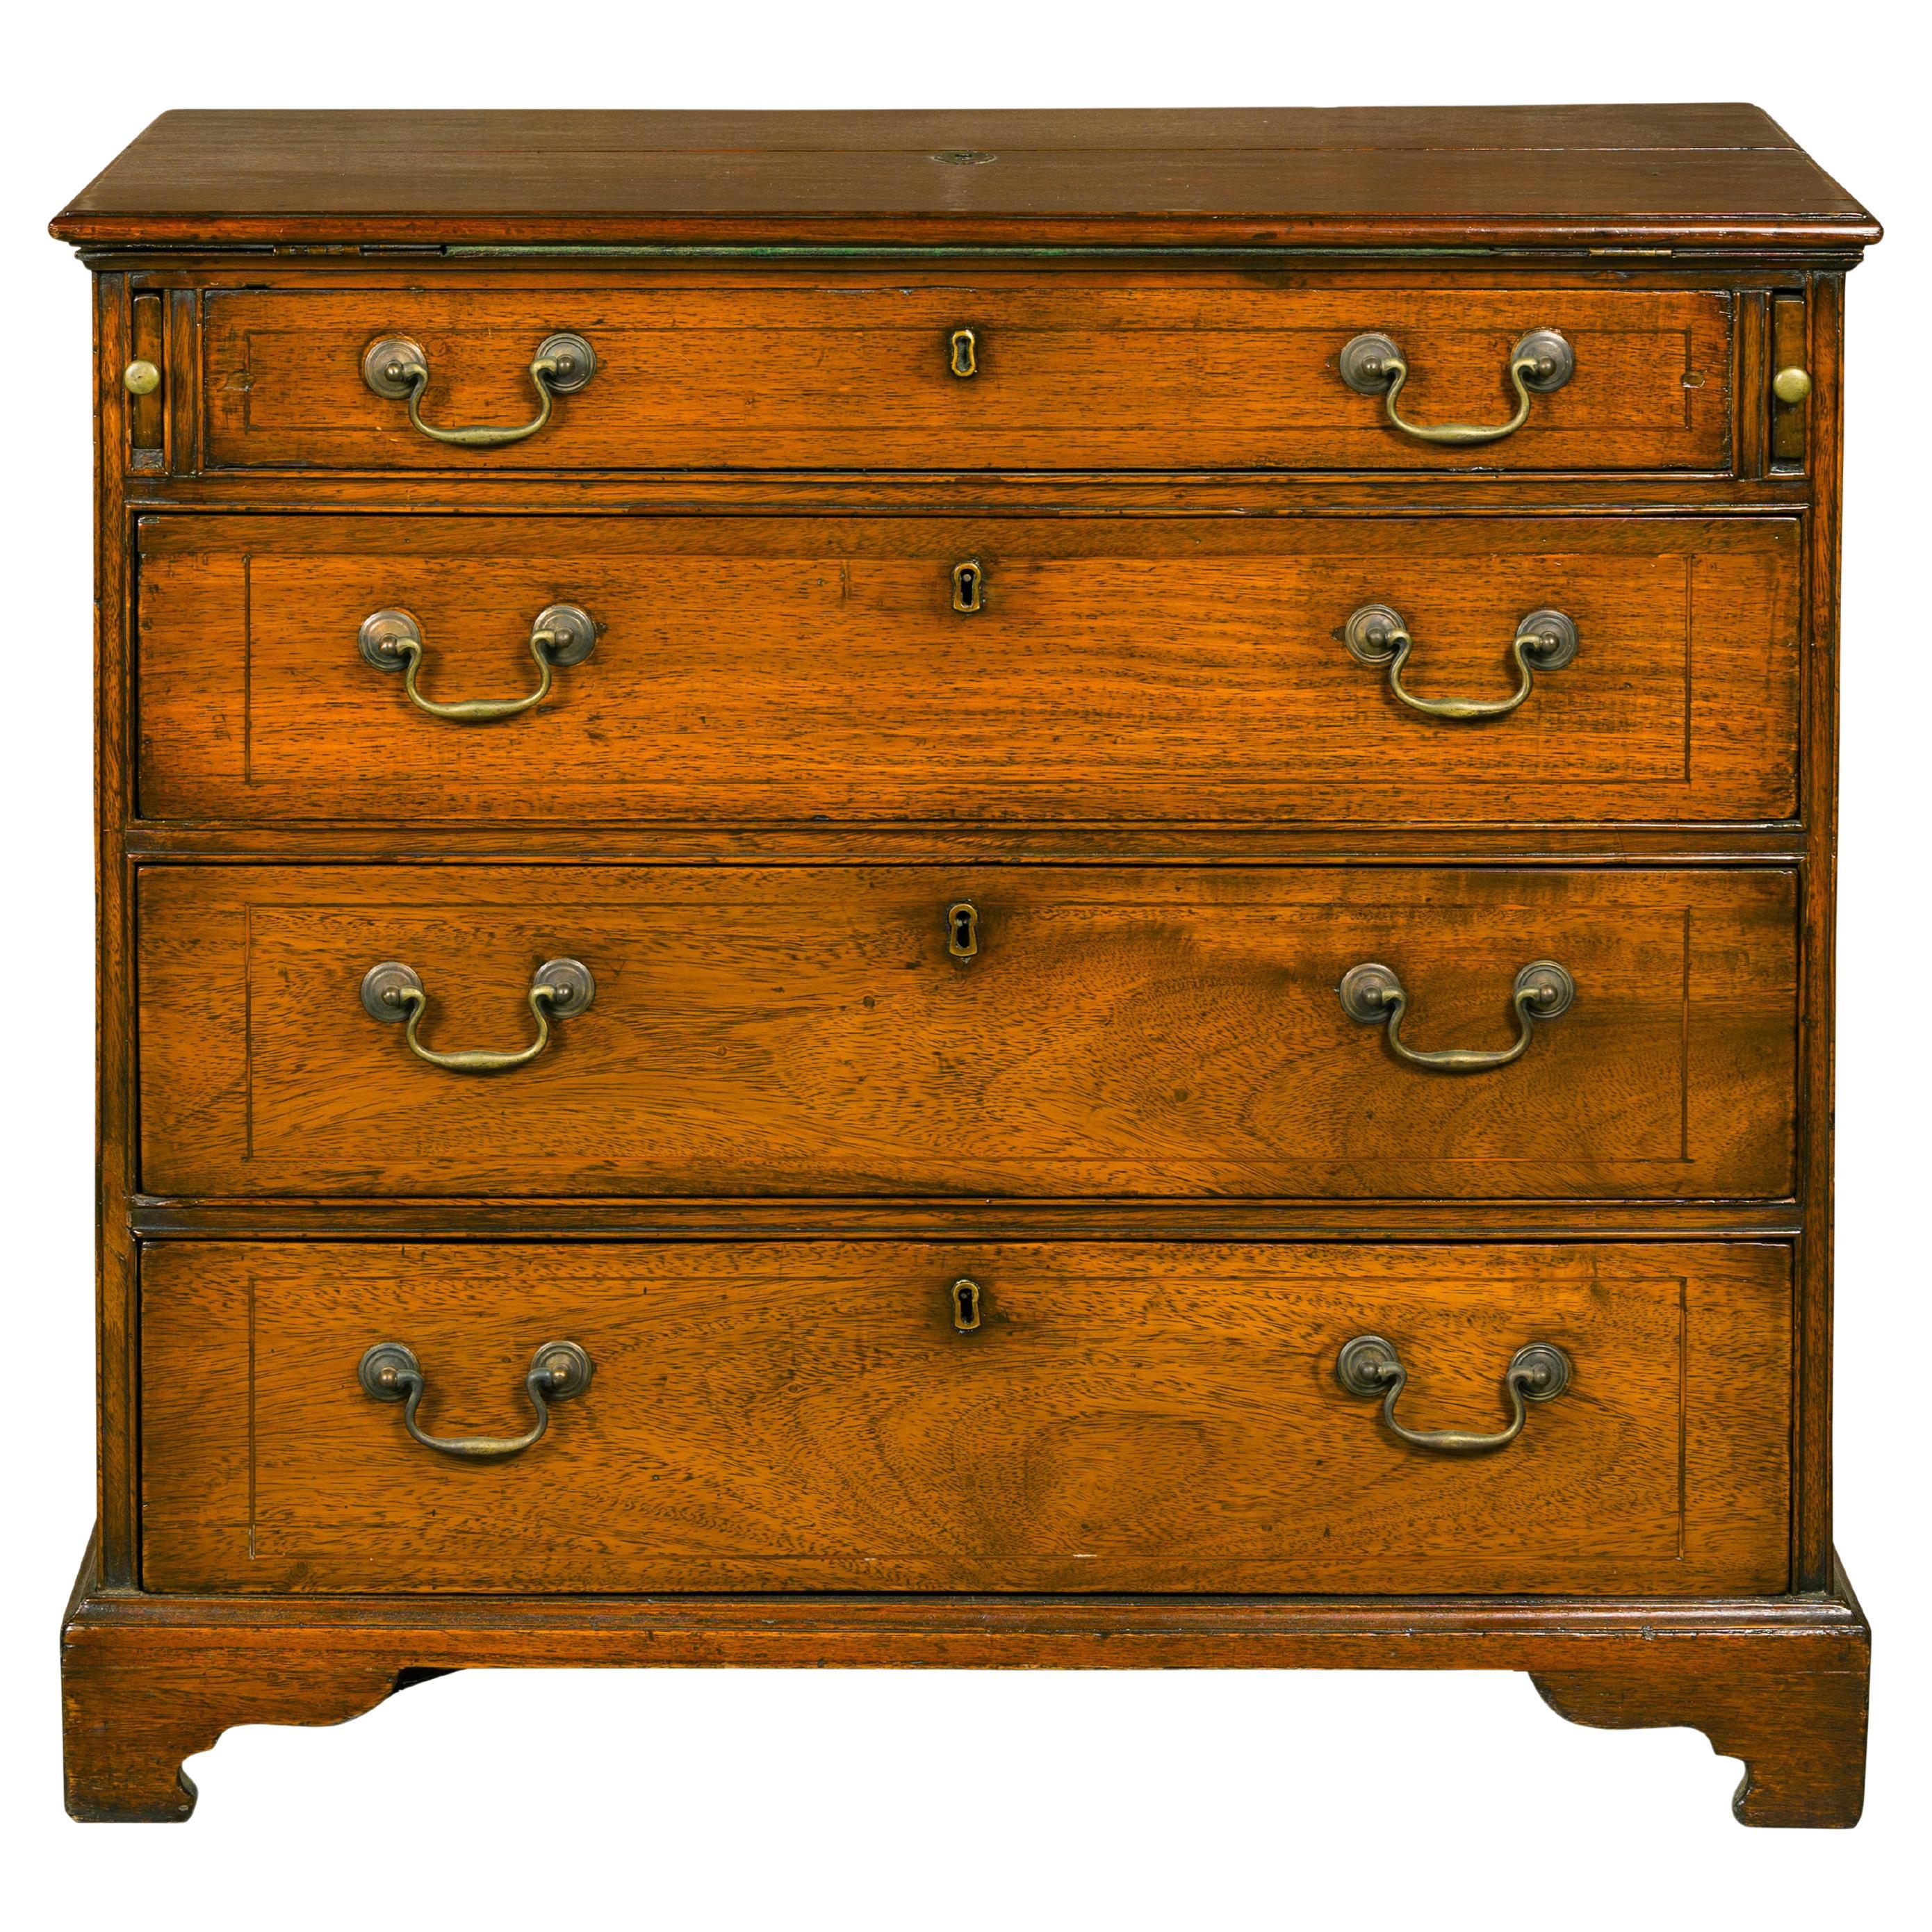 English 19th Century Walnut Campaign Butler's Desk with Three Drawers